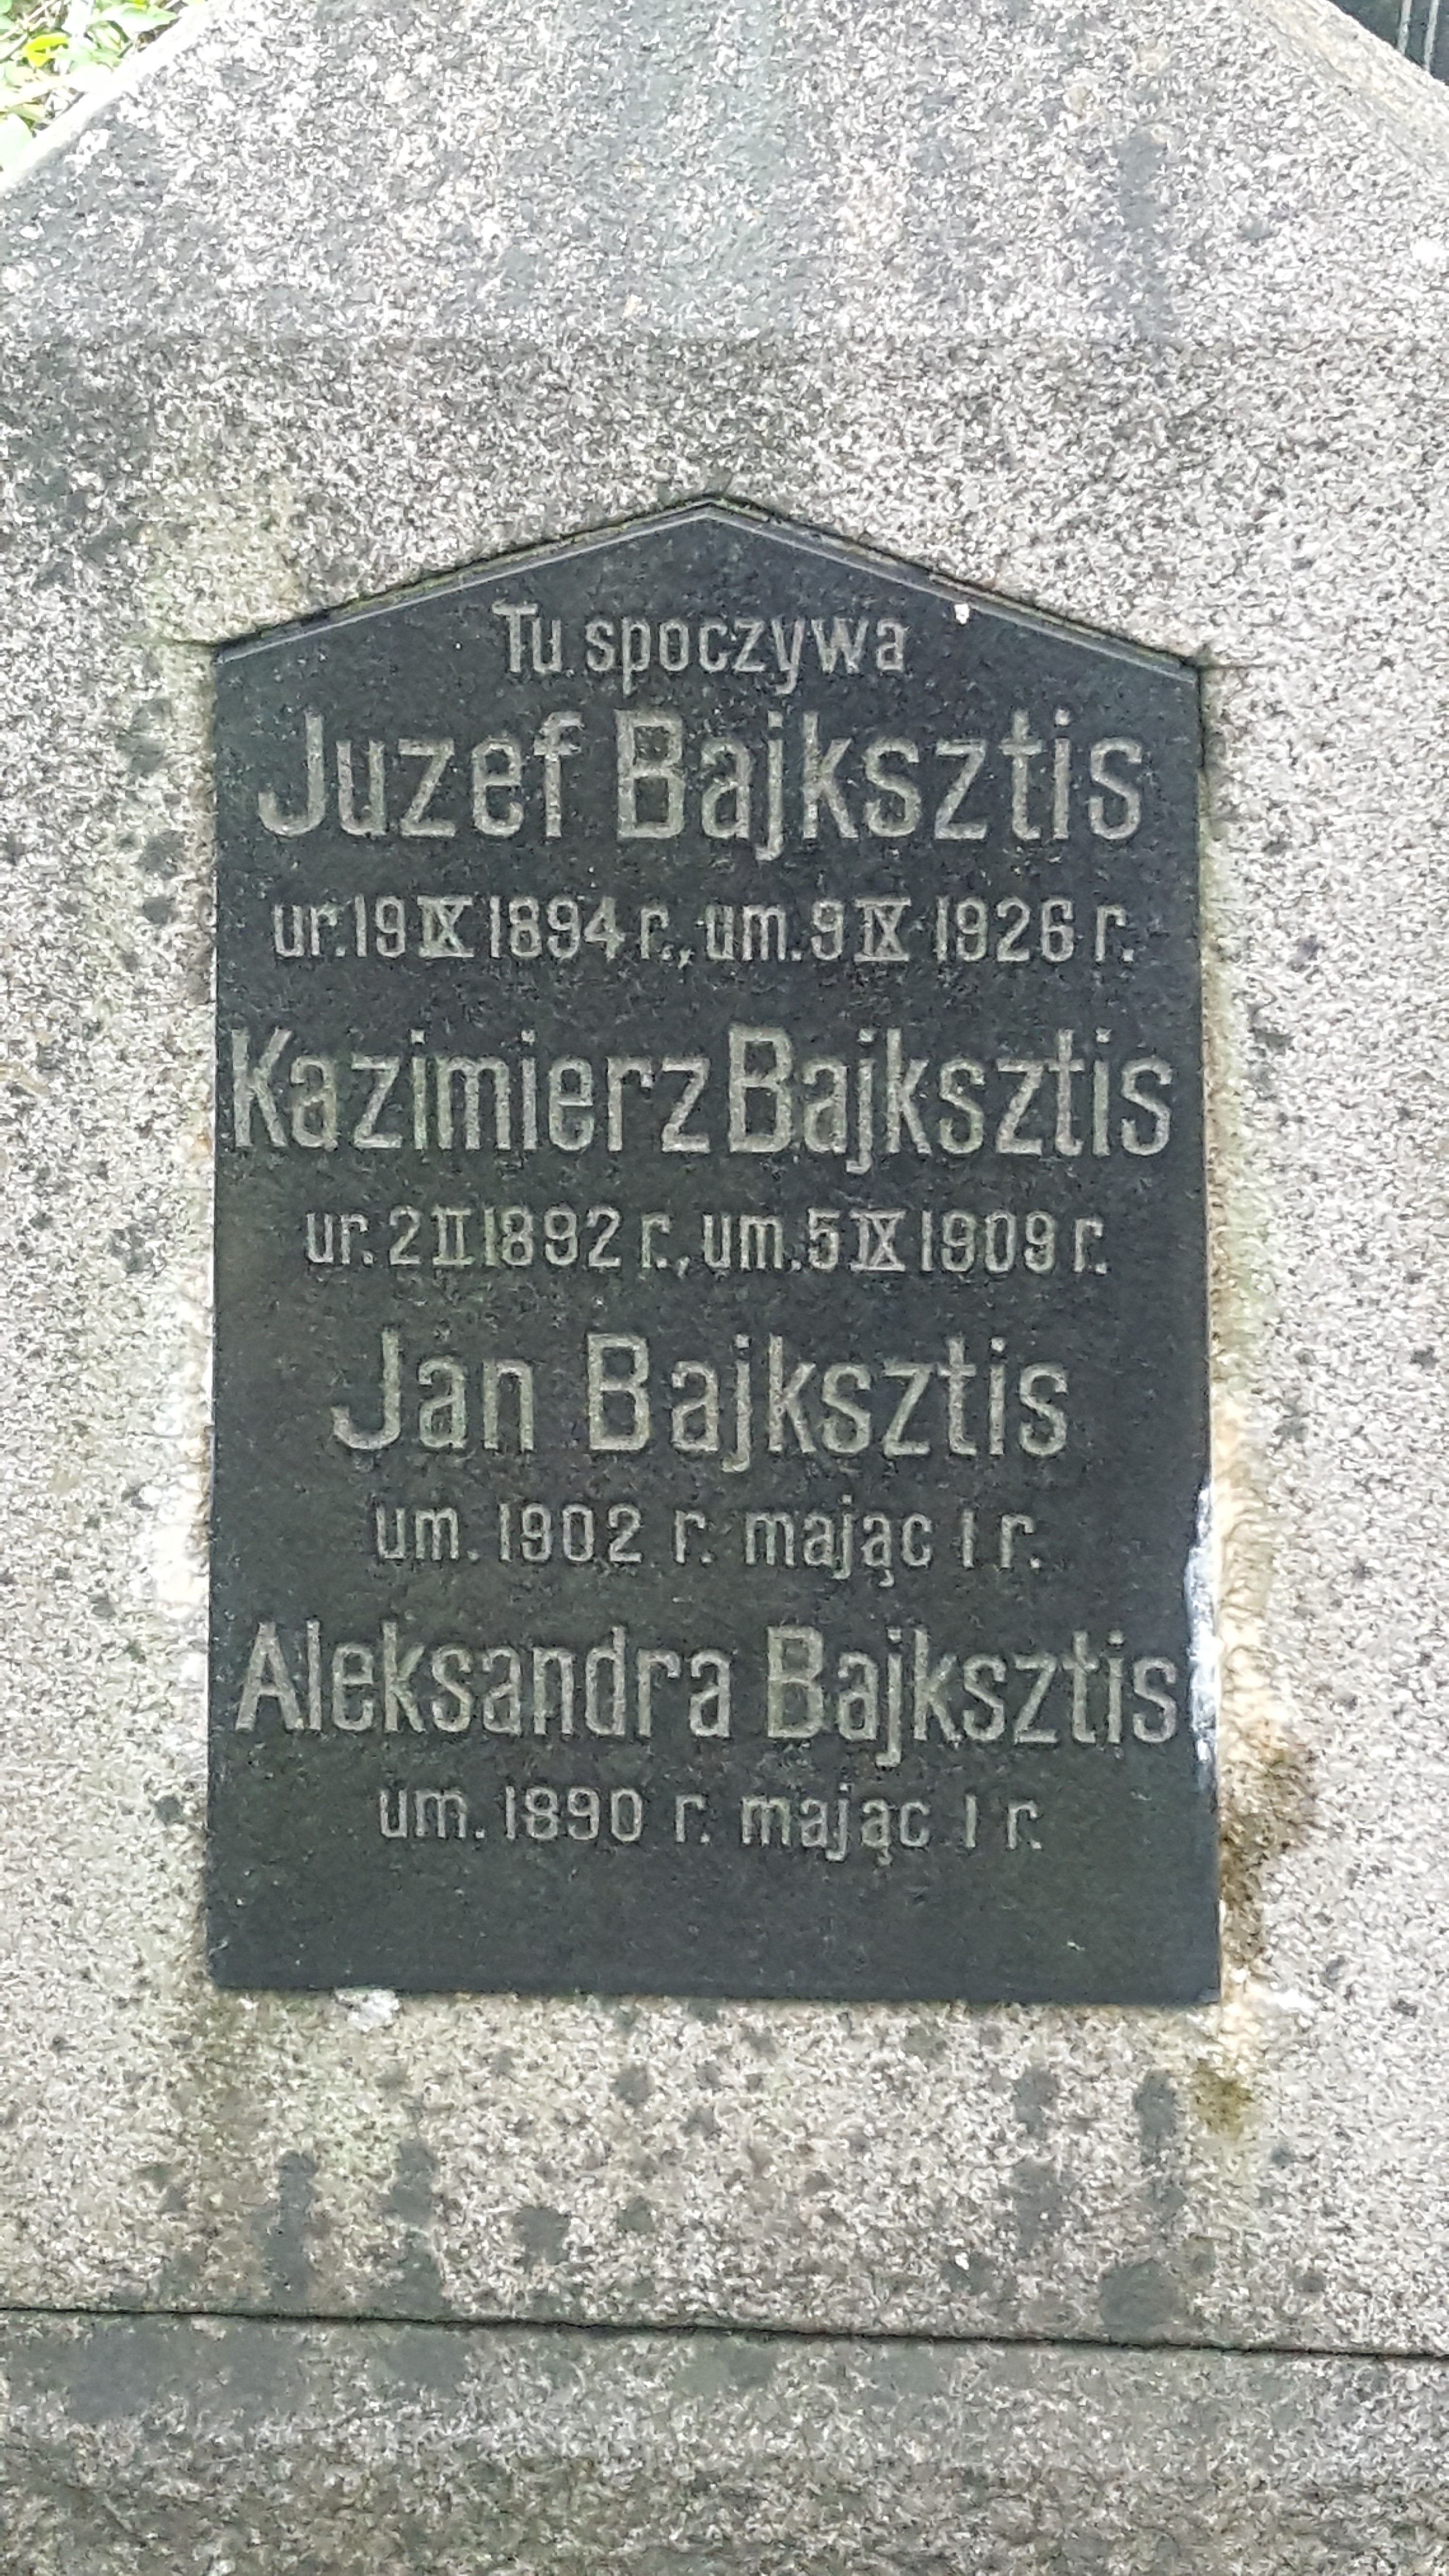 Inscription from the tombstone of the Baikhtis family, St Michael's cemetery in Riga, as of 2021.